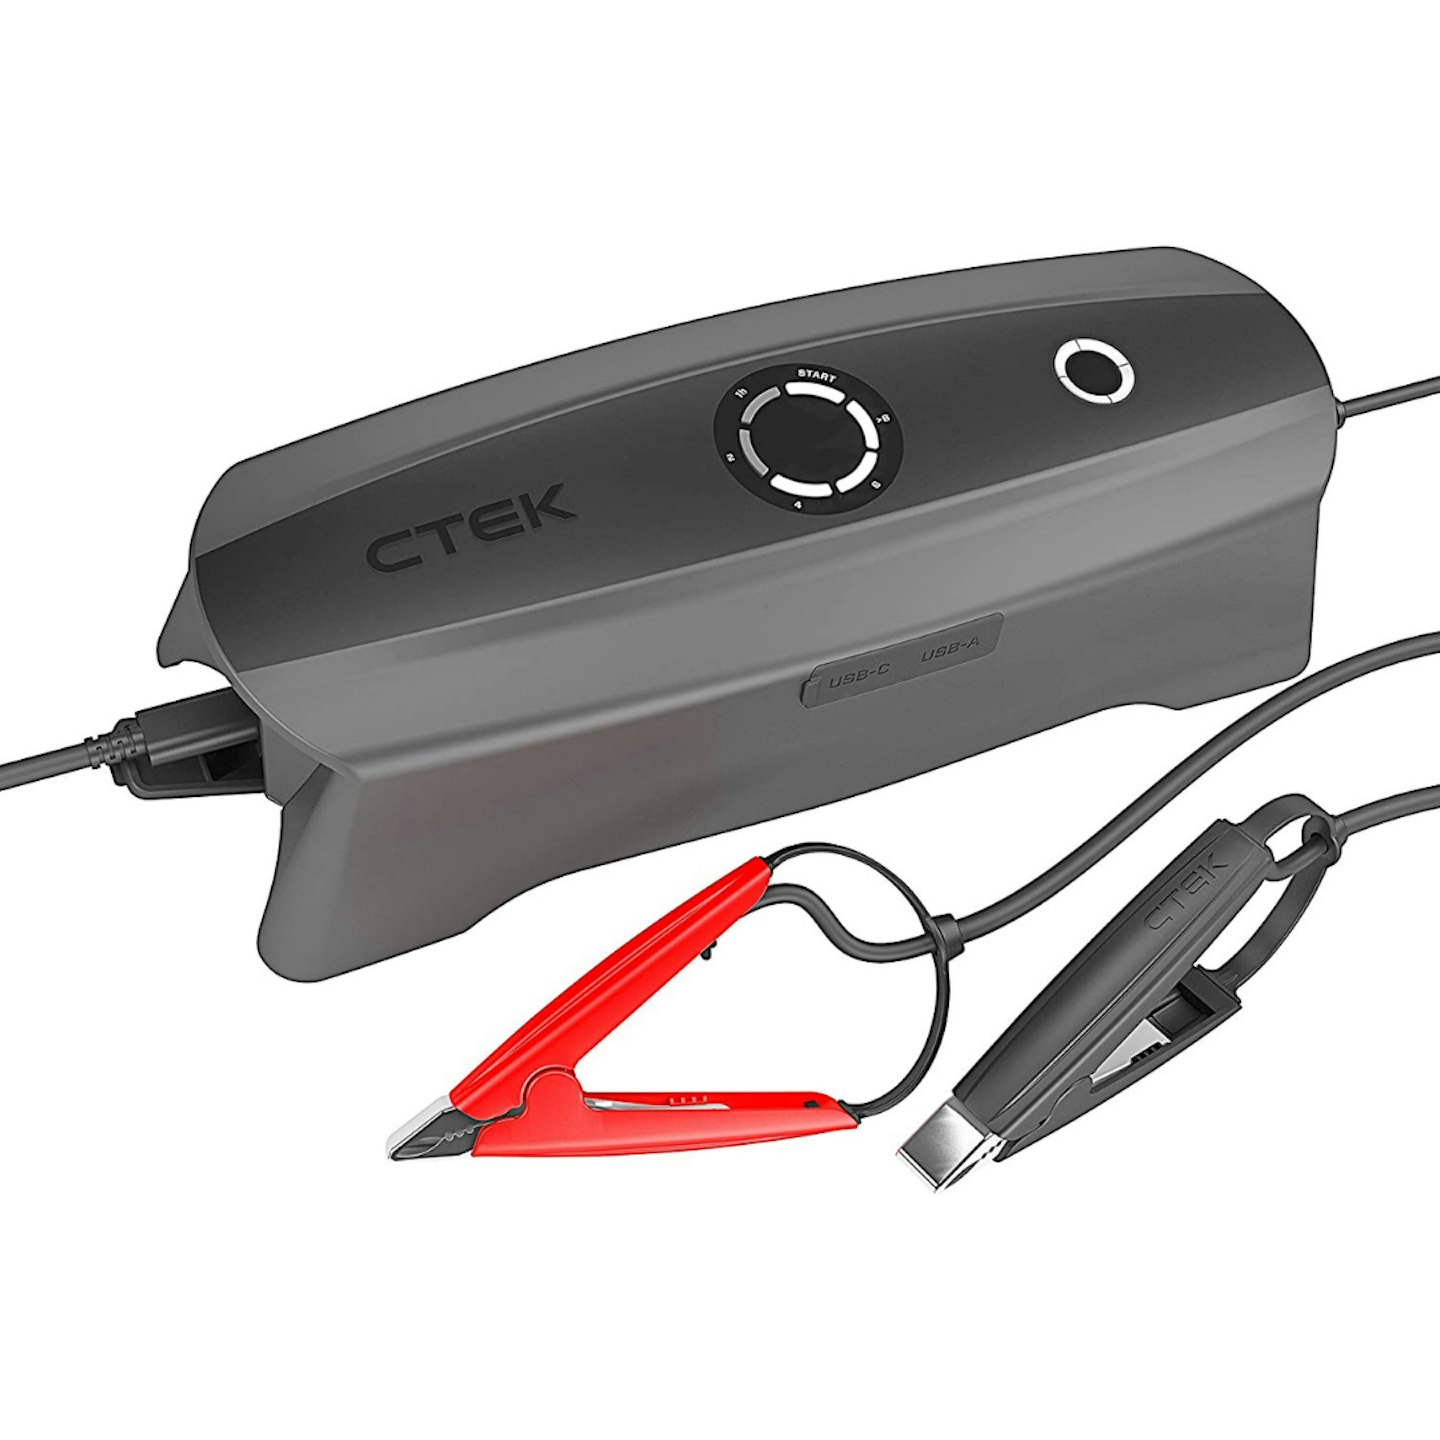 CTEK Portable Battery Charger Maintainer